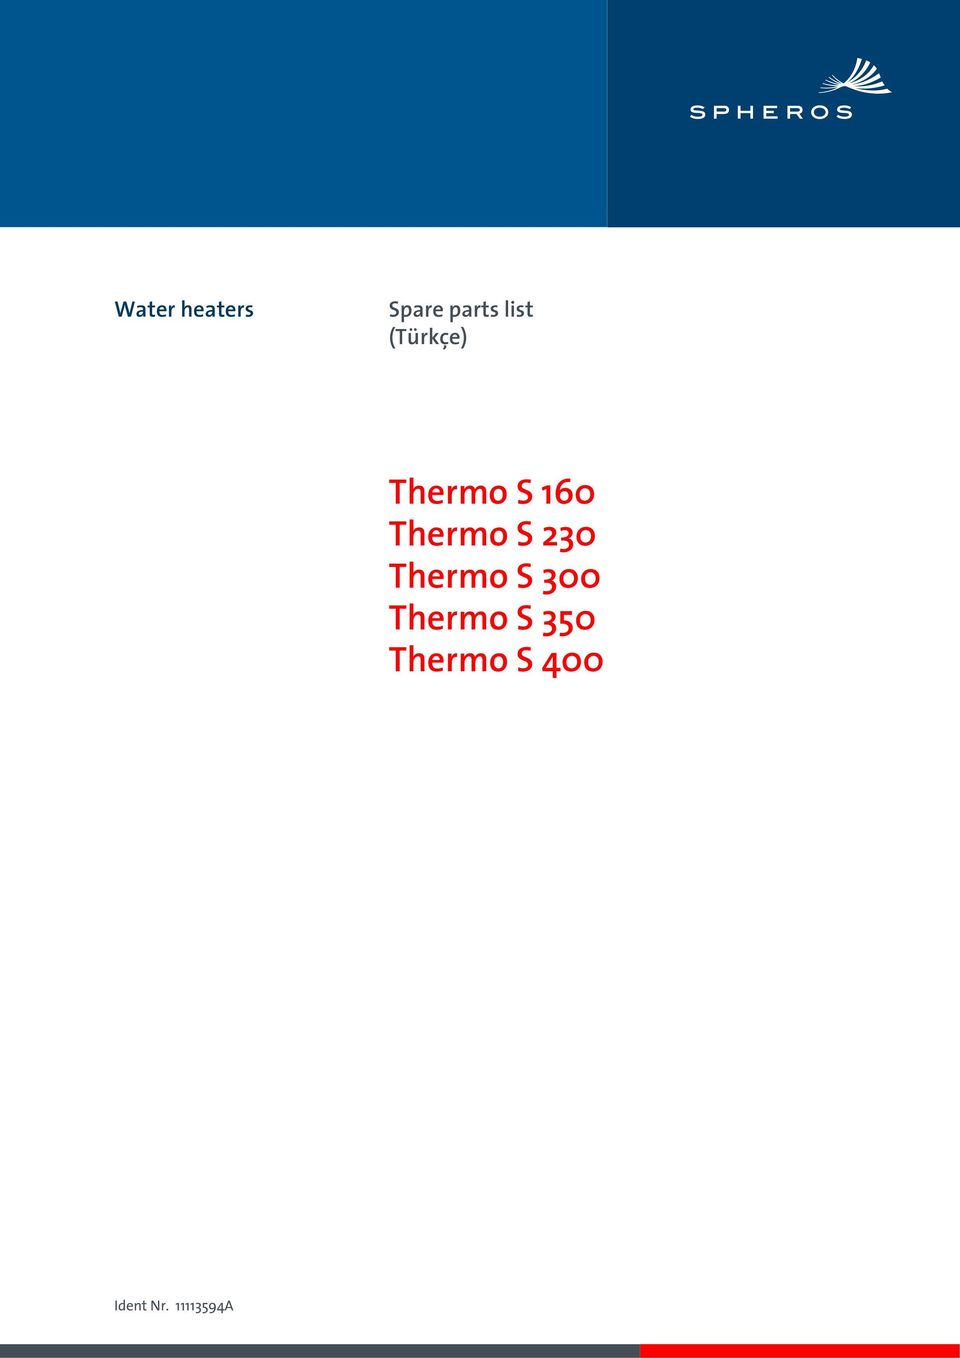 Thermo S 30 Thermo S 300